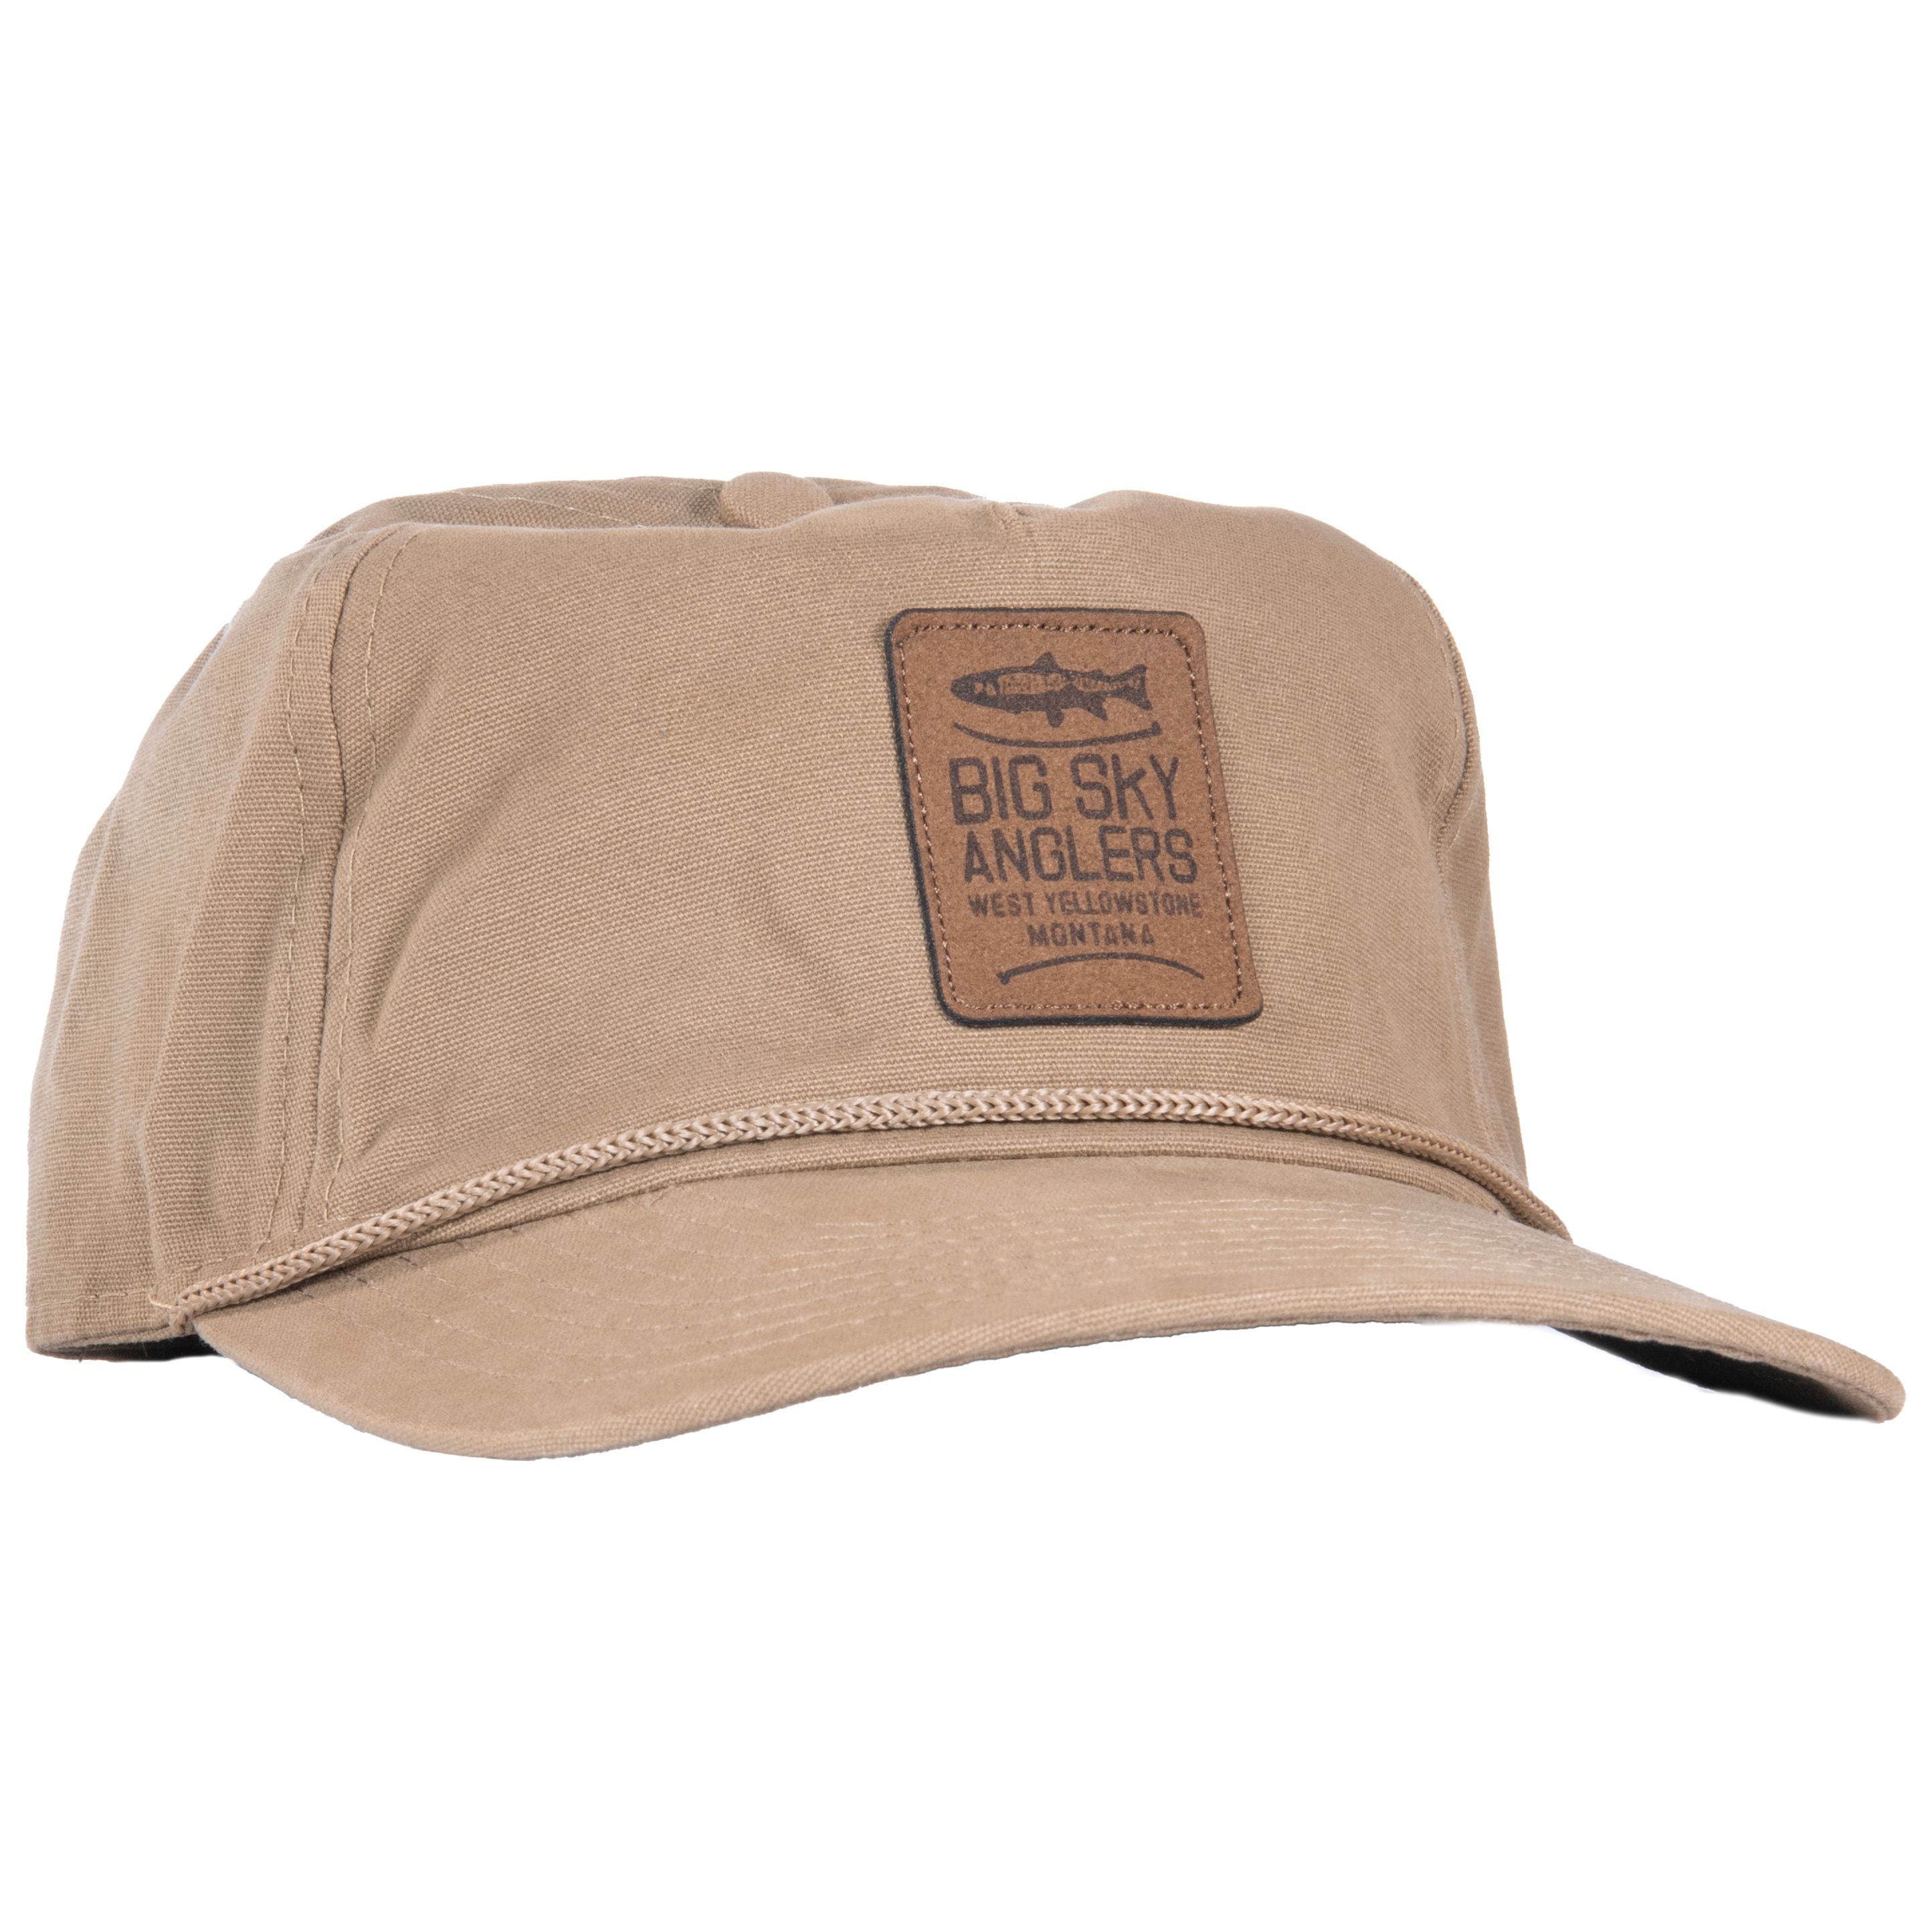 Big Sky Anglers Classic Logo Leather Patch Ranger Hat - Lumber Default Title Image 01